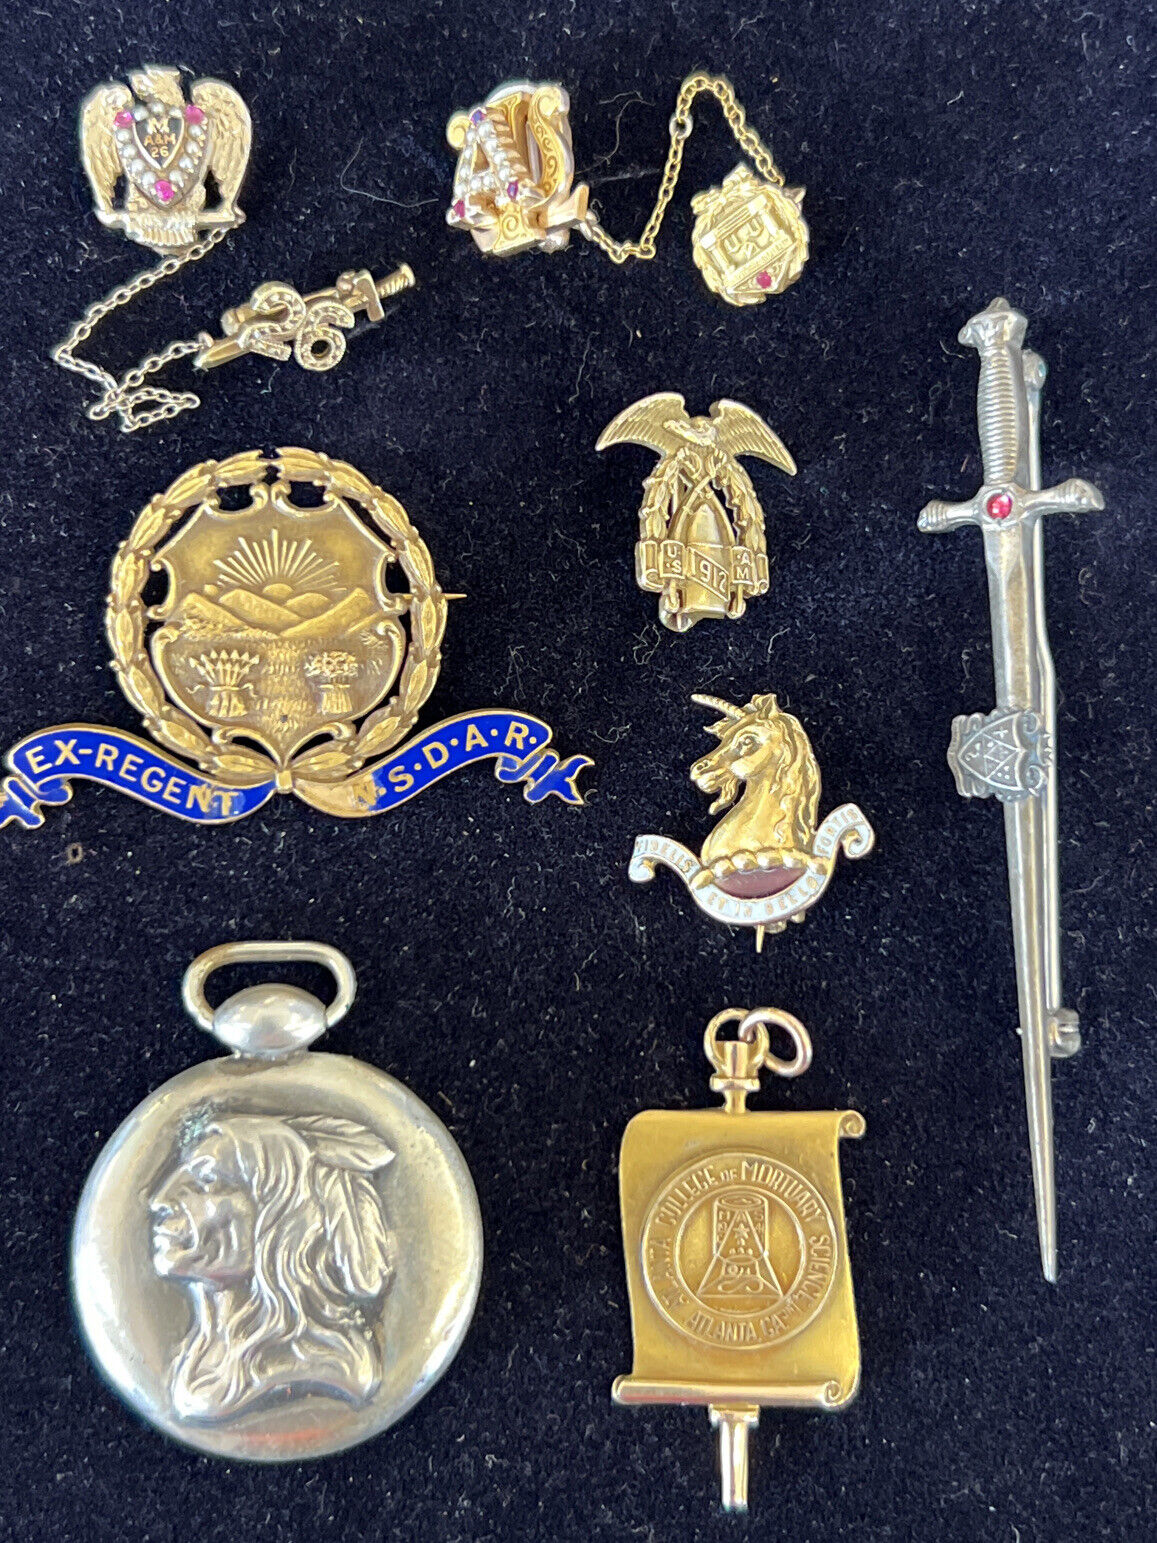 Solid 10k 14k Gold Silver Antique Pin Medal Lot Fraternity Army 1912 NSDAR Sword